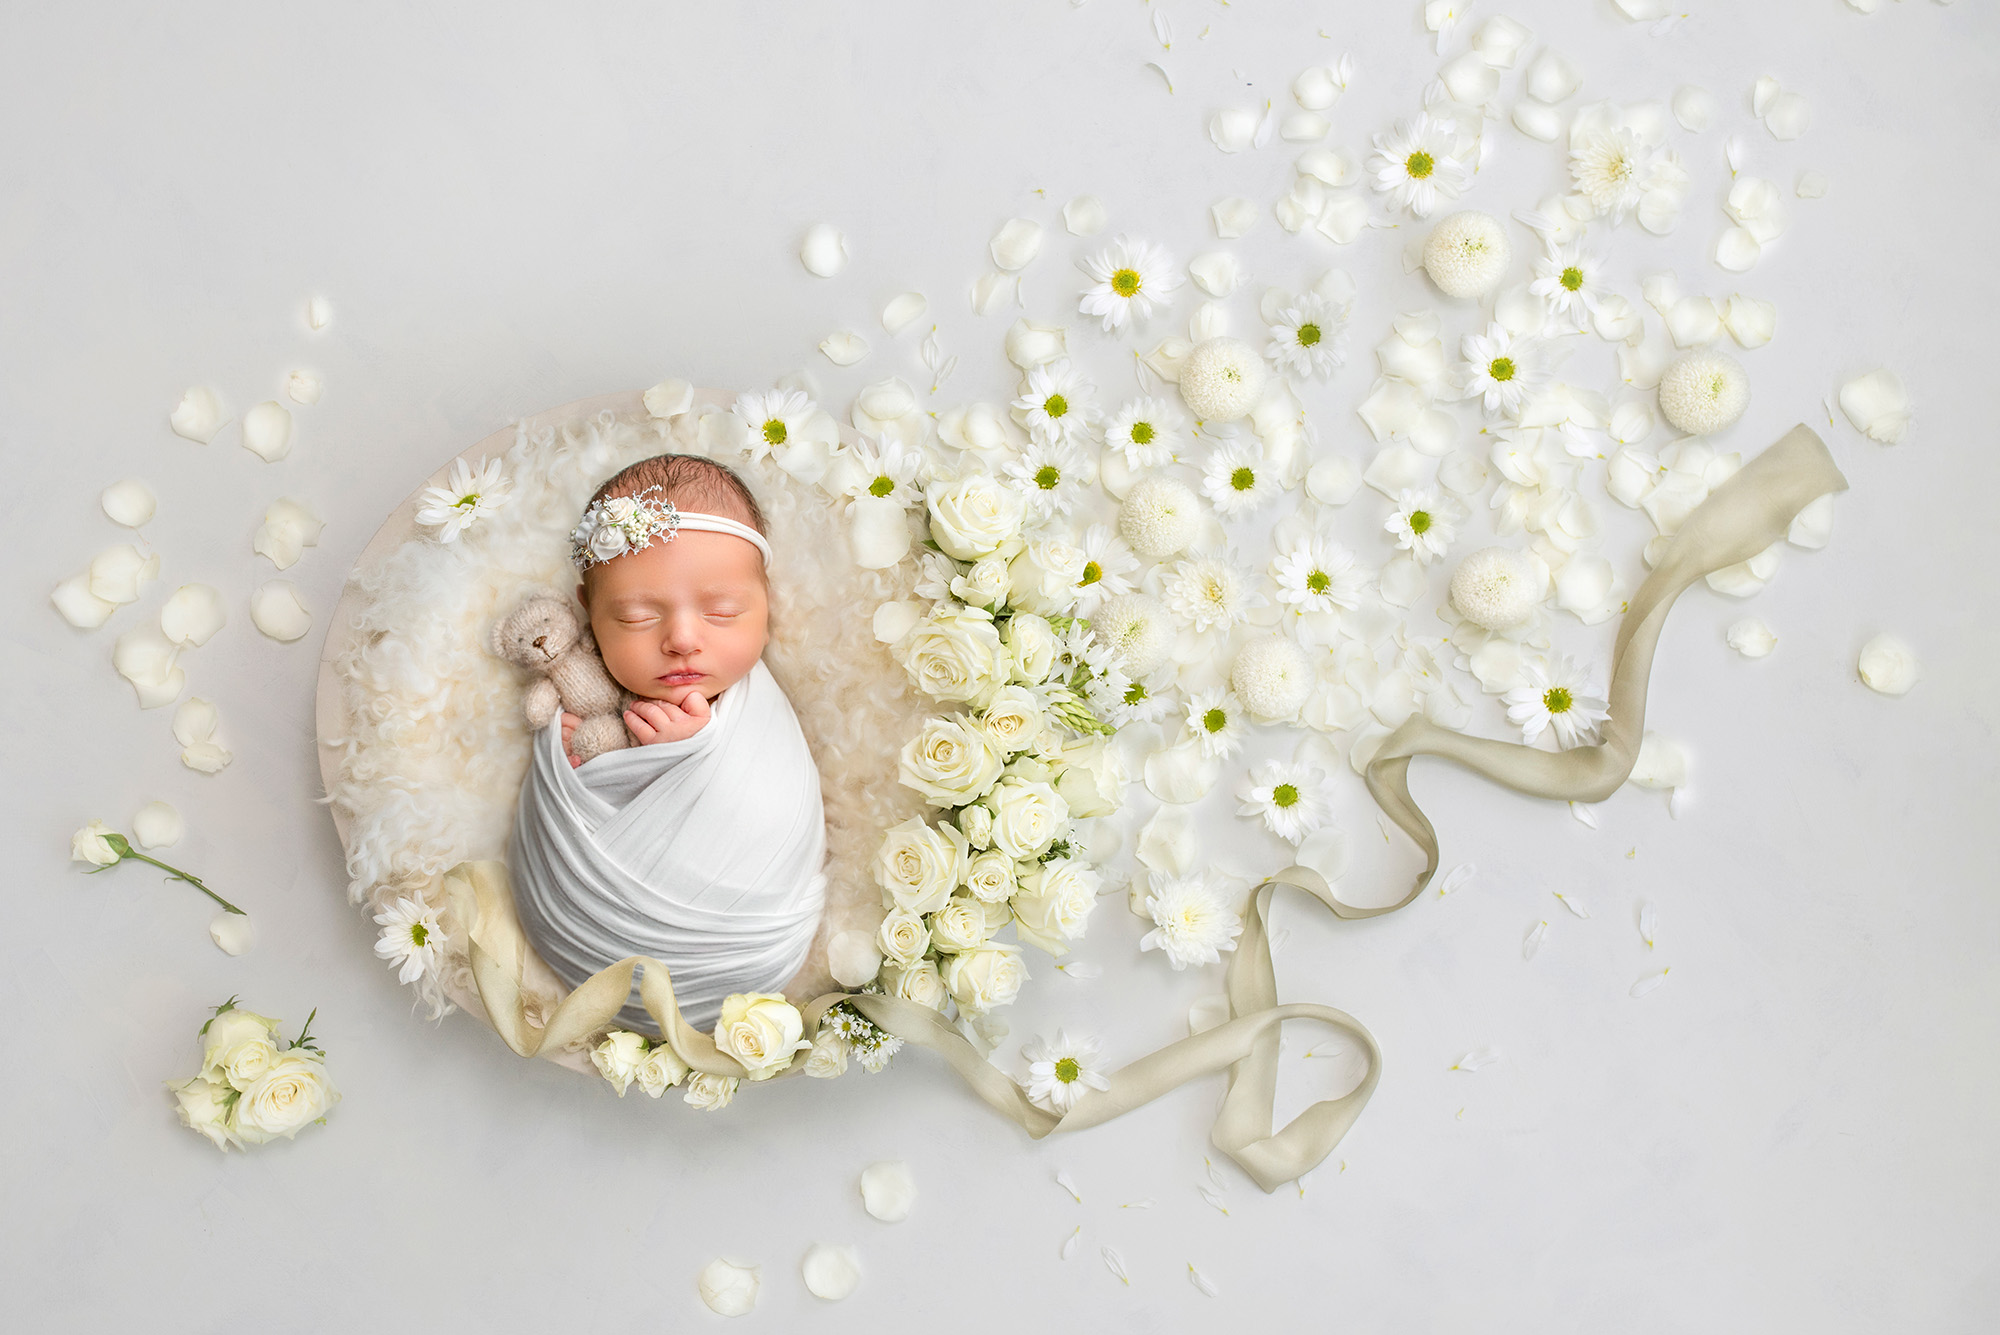 Wrapped in white and cradling a small teddy bear, this baby lies in a cream bowl surrounded by daisies and khaki ribbon, a picture of tranquility